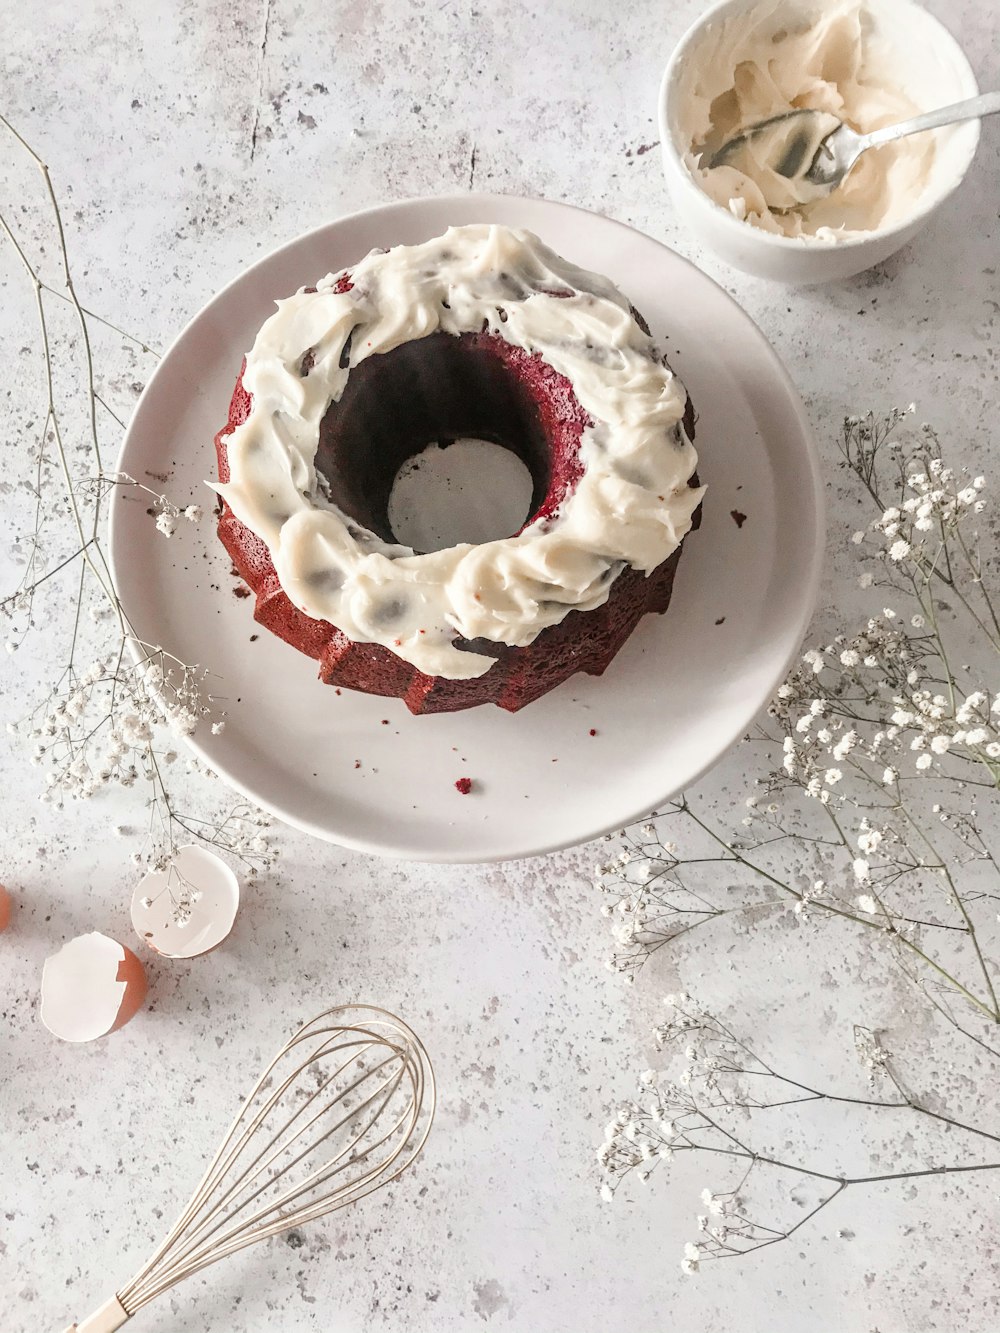 a red velvet cake with cream frosting on a white plate